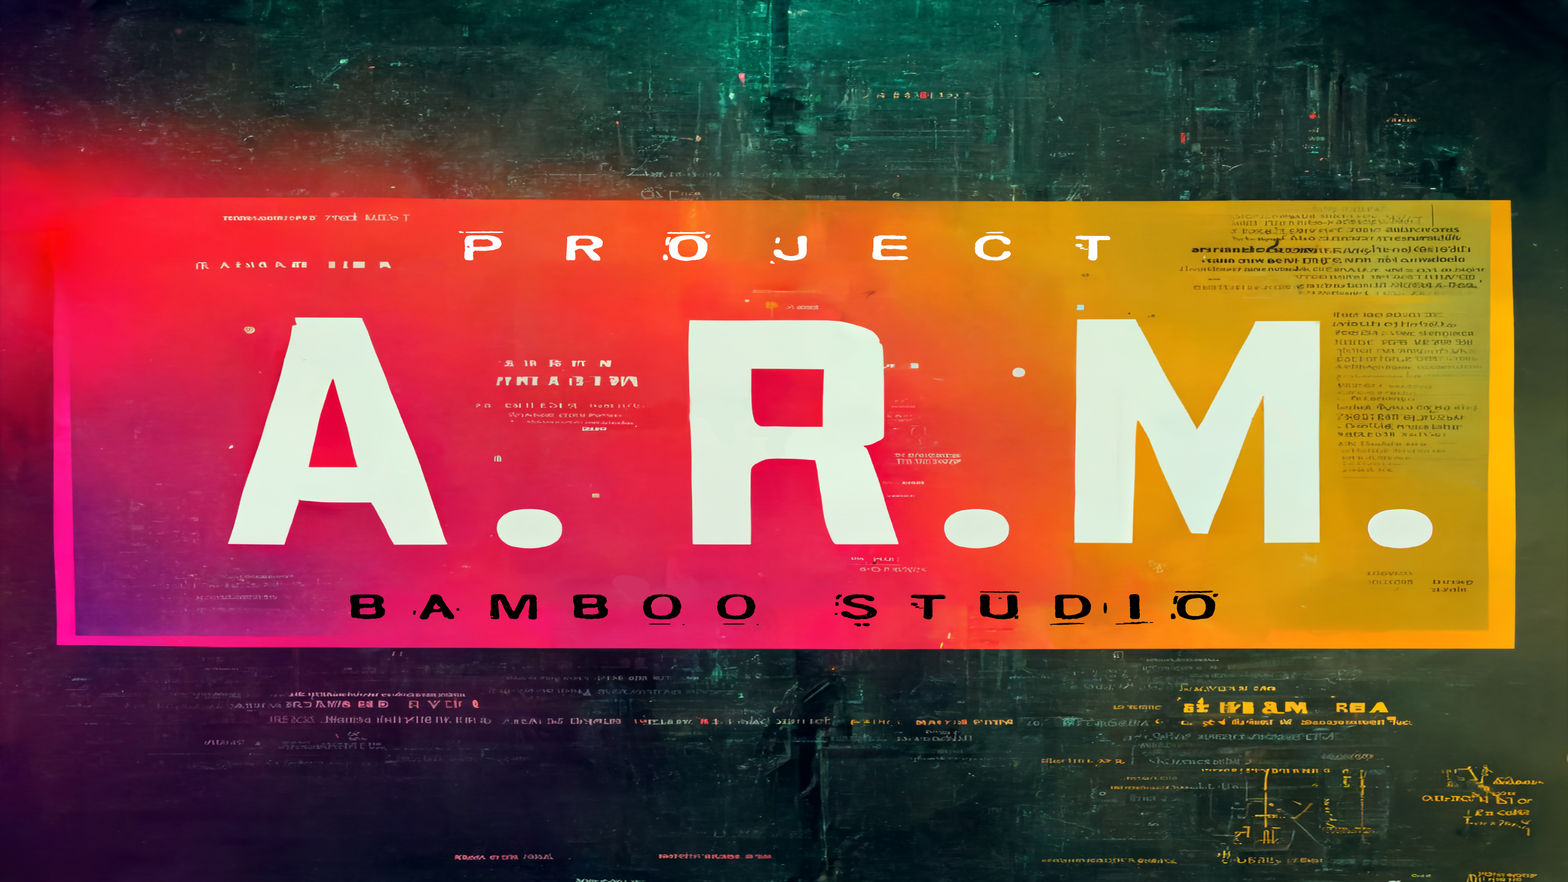 Project: A.R.M.